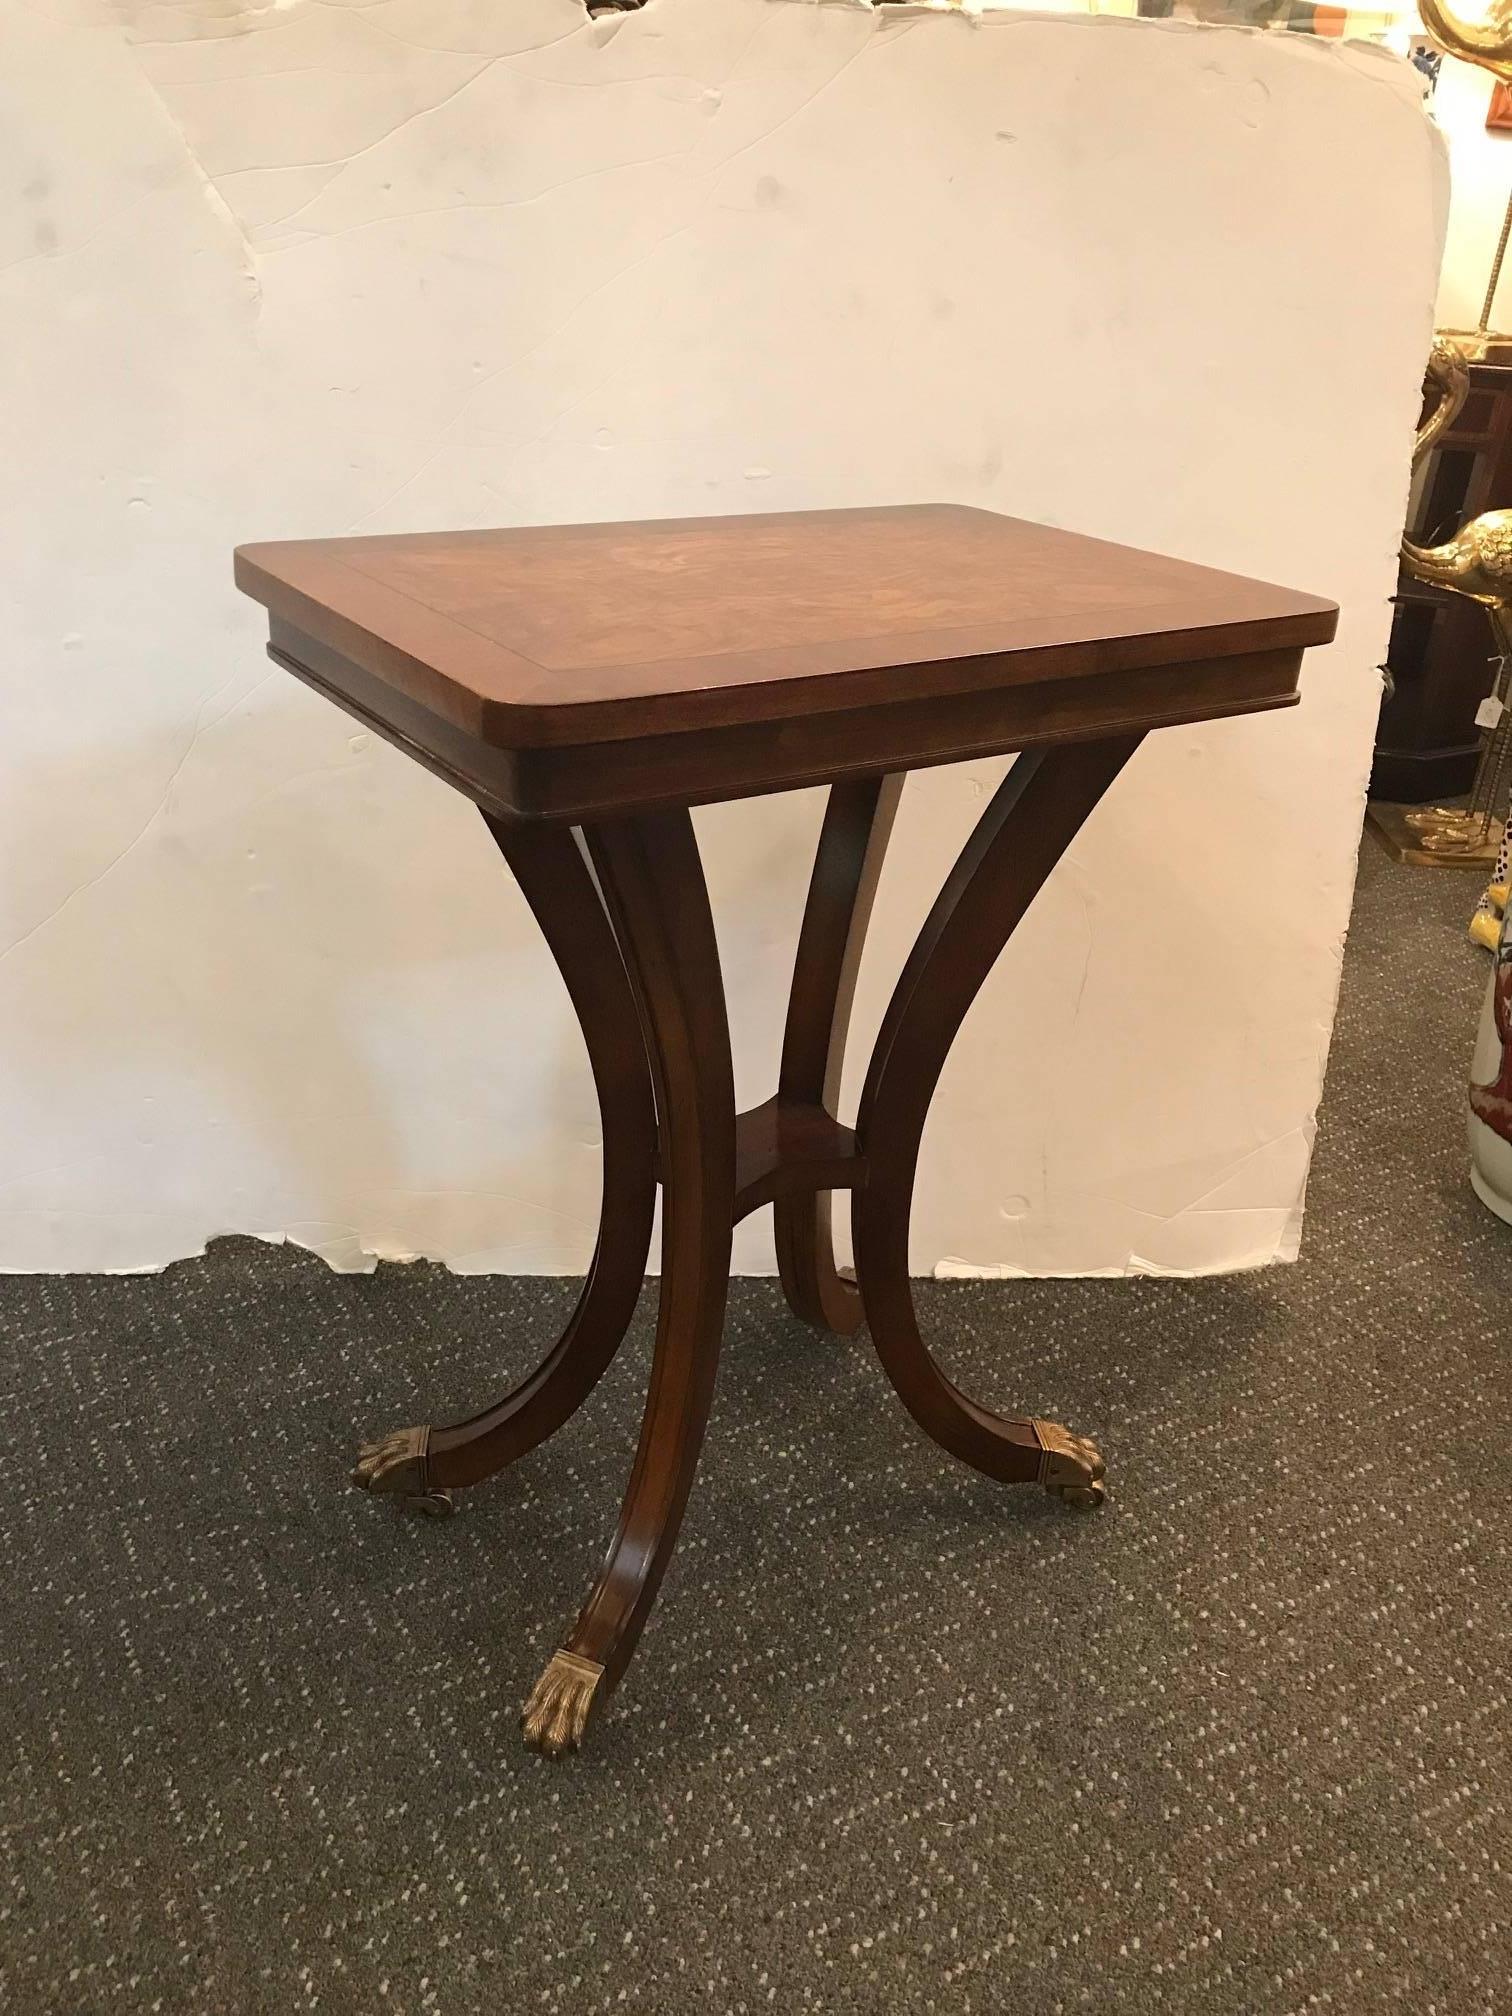 A diminutive pair of neoclassical lamp side tables. The walnut burl tops framed in walnut satin borders supported by graceful saber legs, capped paw feet with castors.